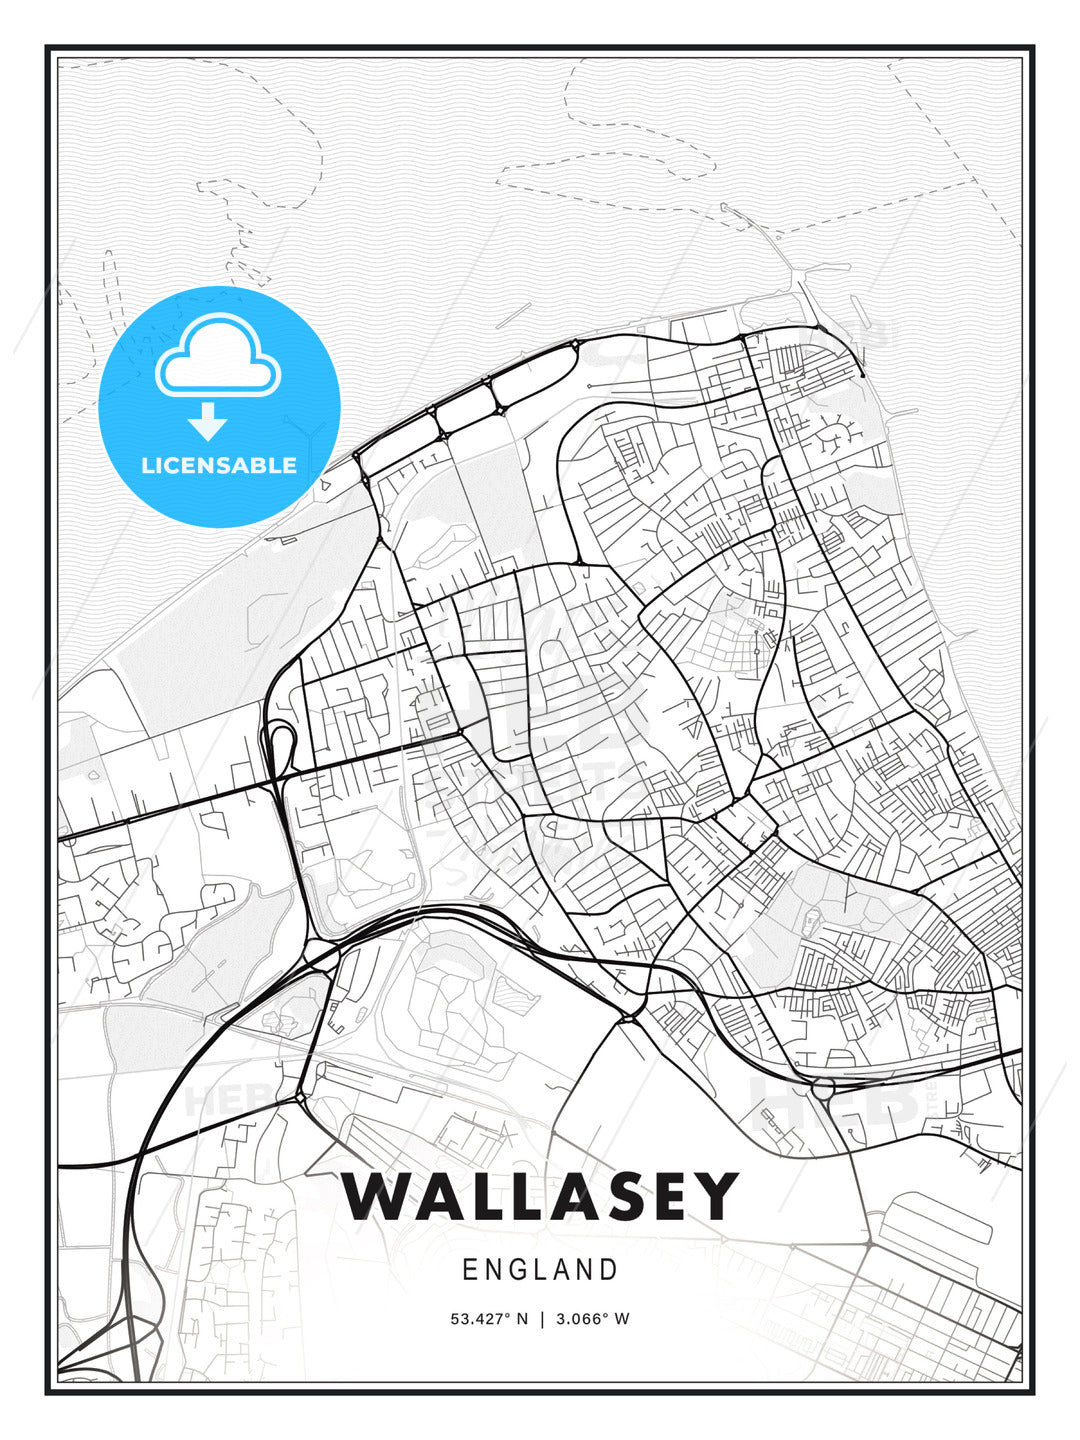 Wallasey, England, Modern Print Template in Various Formats - HEBSTREITS Sketches